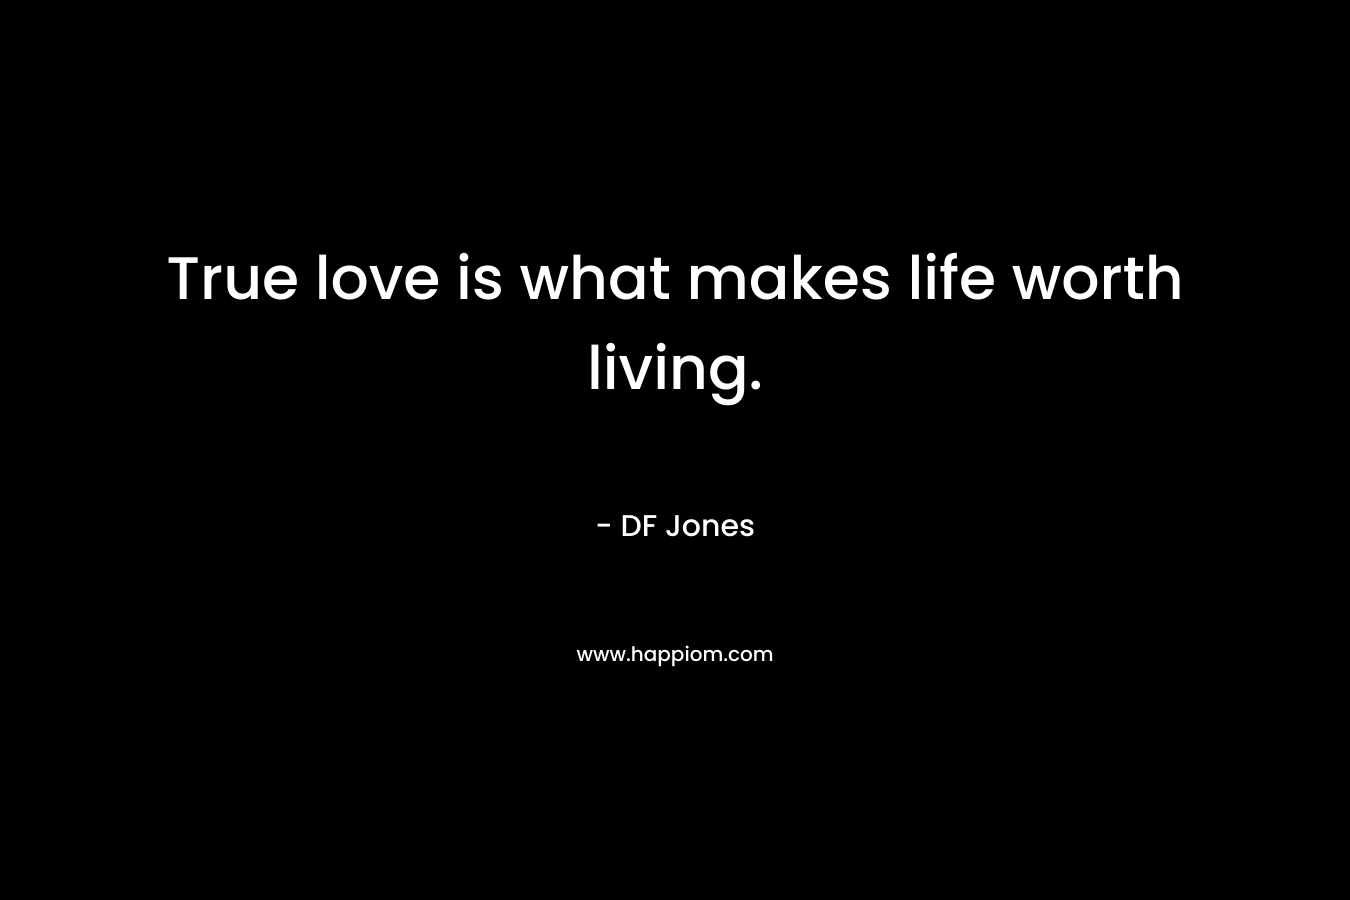 True love is what makes life worth living.